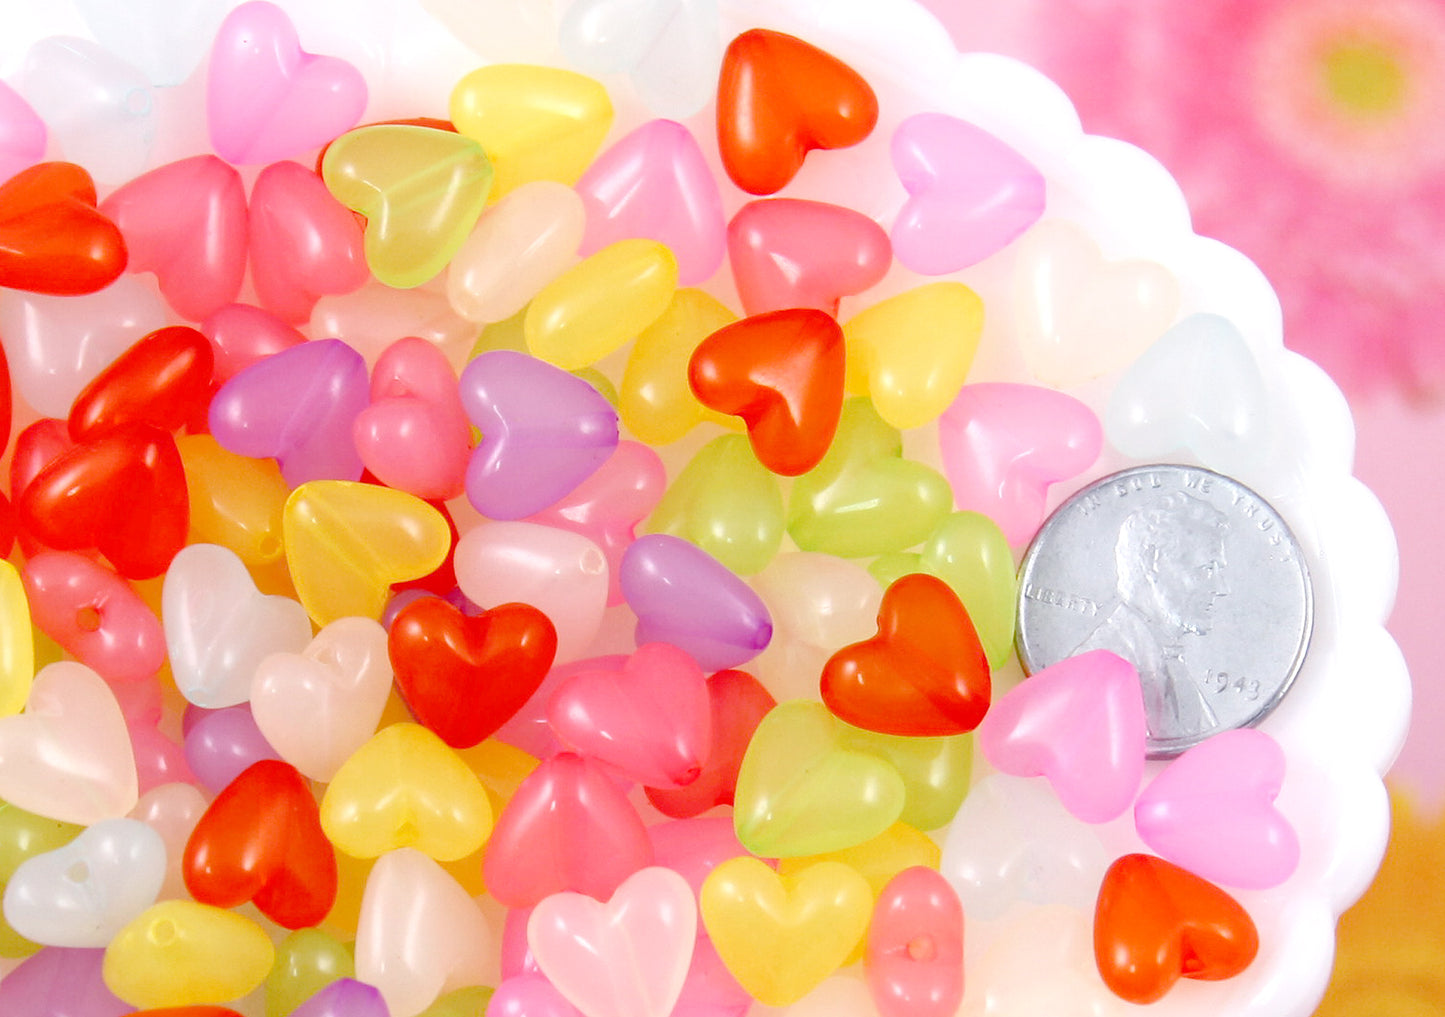 Jelly Heart Beads - 10mm Small Jelly Color Hearts Bead Translucent Rounded Plastic Acrylic or Resin Heart Beads - 150 pc set